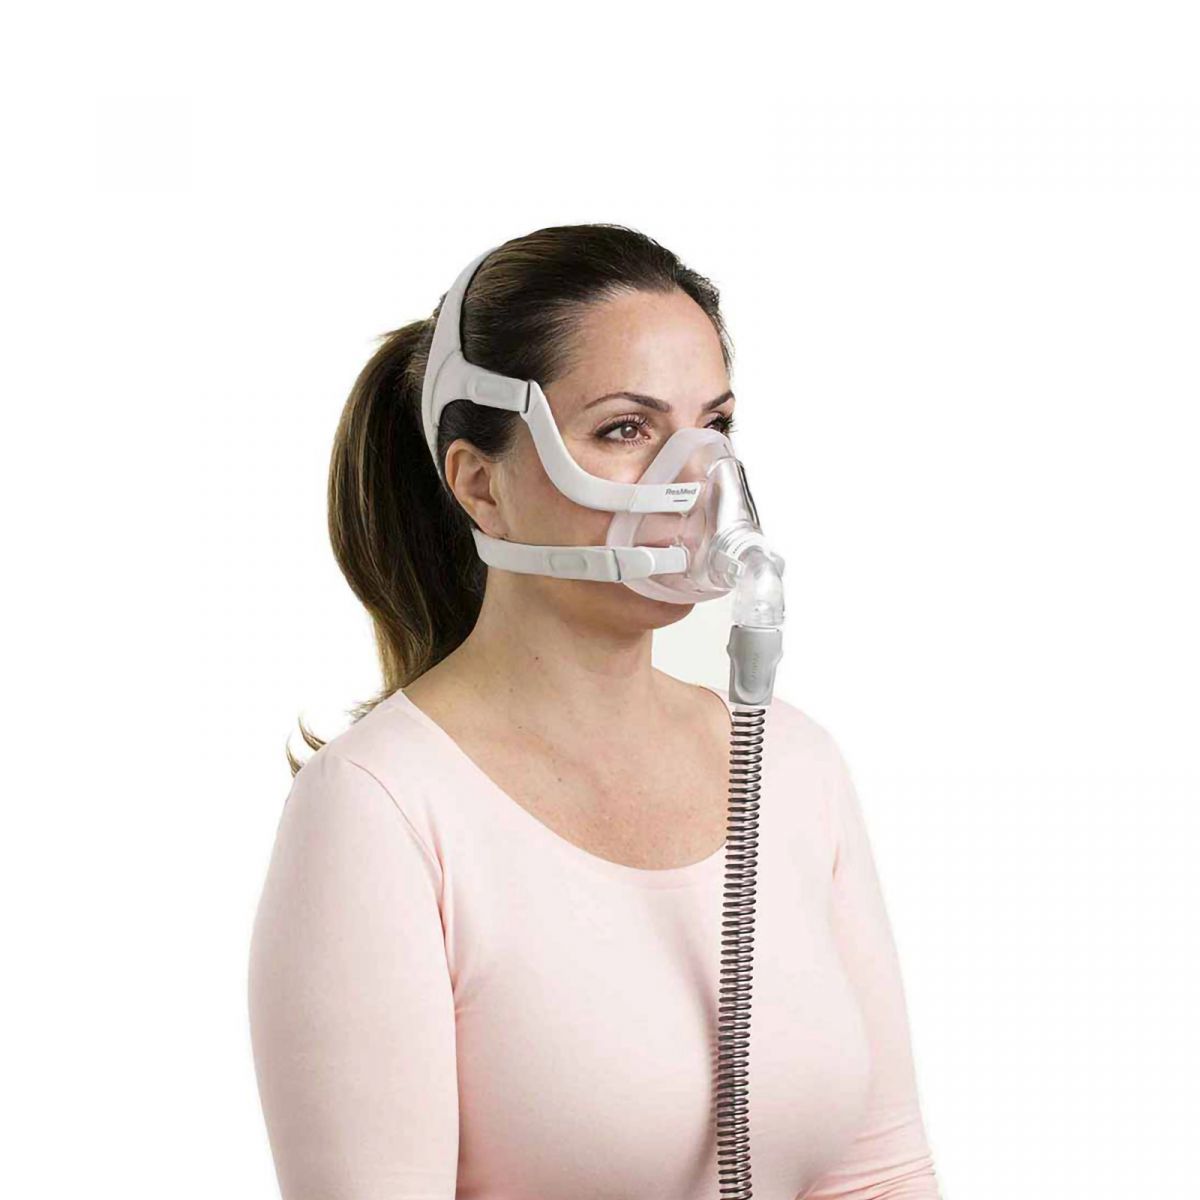 cpap-faq-cpap-mask-parts-questions-what-are-the-different-types-of-cpap-masks-available